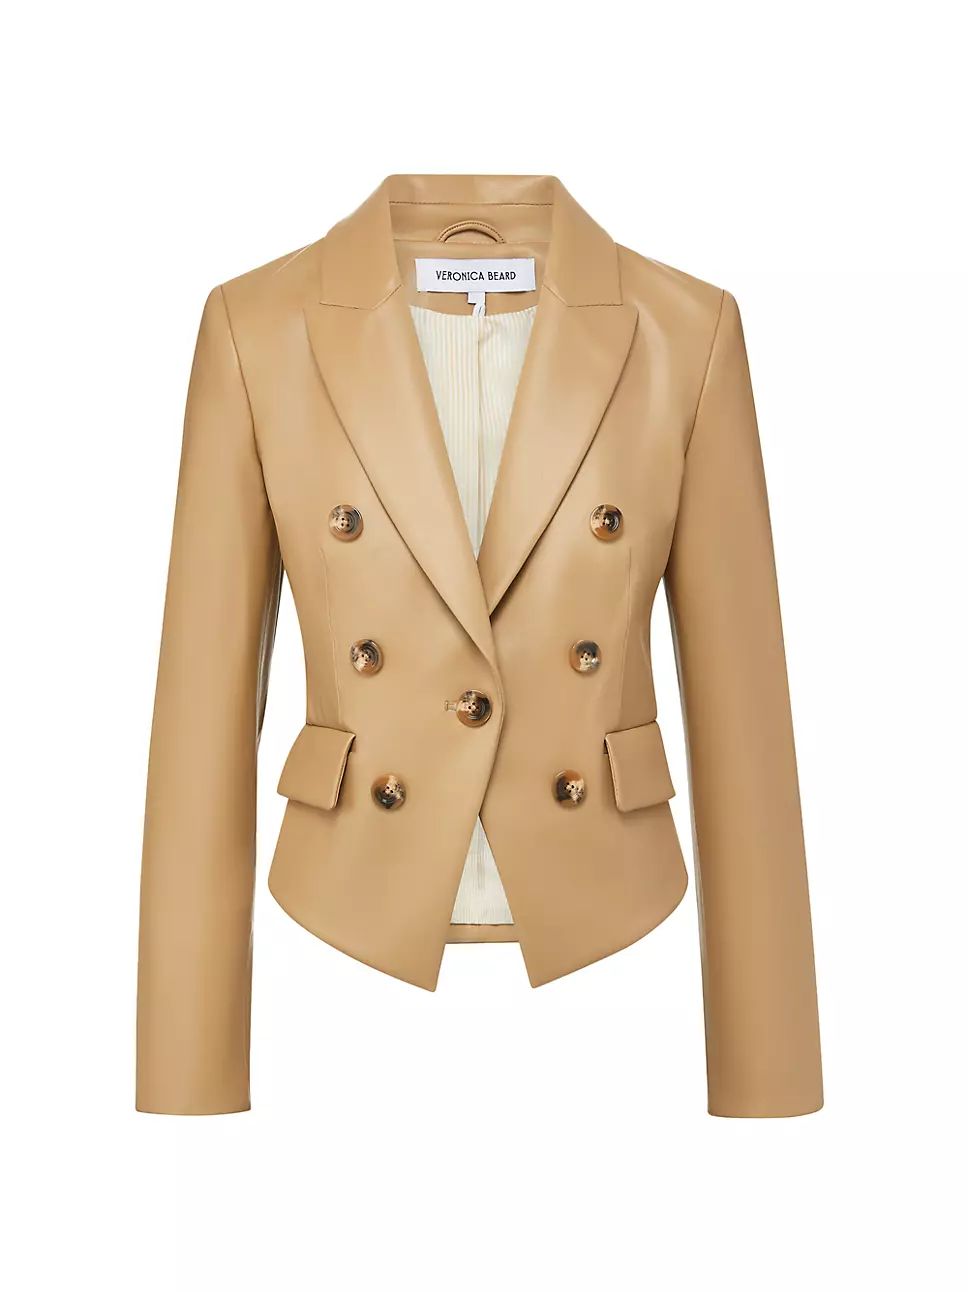 Veronica Beard


Cooke Faux Leather Dickey Jacket



4.3 out of 5 Customer Rating | Saks Fifth Avenue